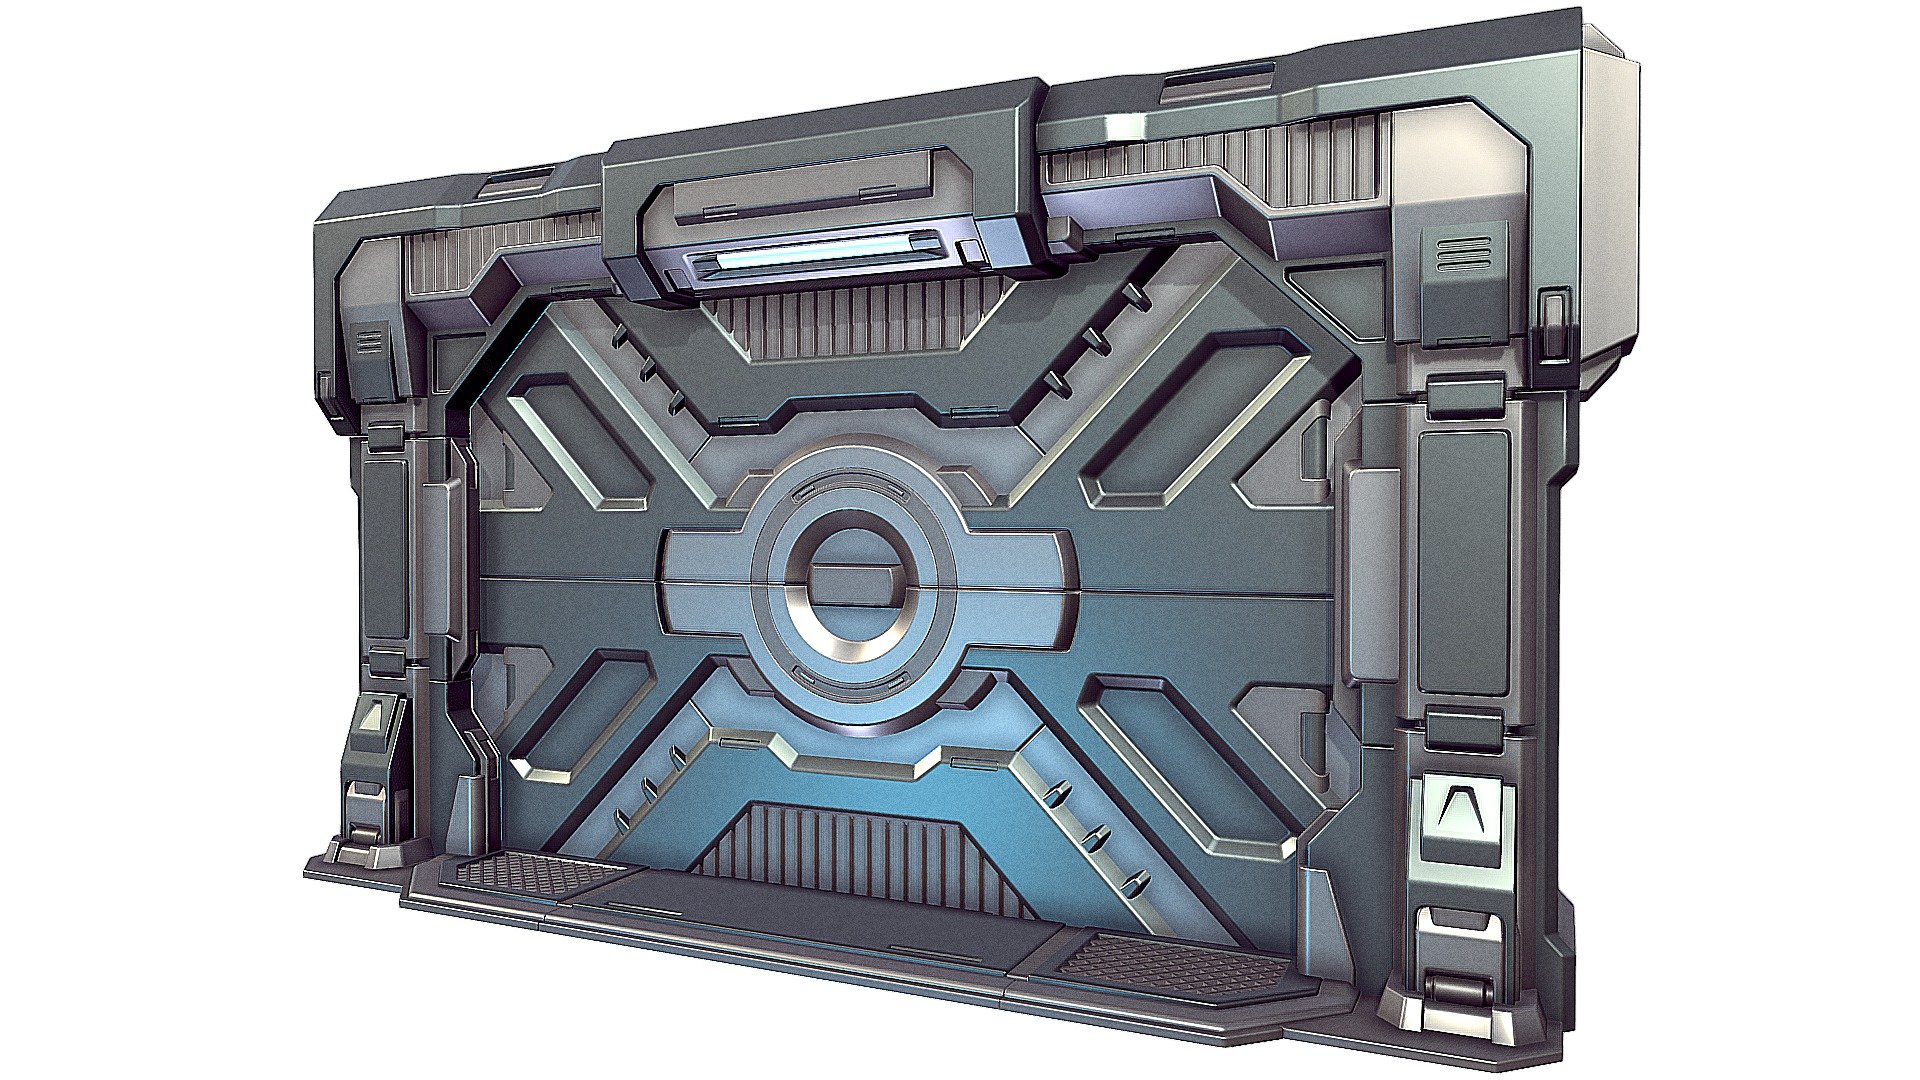 Hey! I hasten to present another props for the environment, in the form of Sci-fi door HighPoly! This is a high-poly model. Consists of 65 parts united in one portal and two doors, upper and lower. The project is suitable for retopology as well as for HighPoly Sci-fi art environments! In this model, there are no complex parts, all edges are chamfered, there is no surface subdivision, thereby saving the number of polygons. If you have any questions or something is not clear, write to me in private messages!

File format: Blend, Fbx, Obj

Textures: NO

UV: Yes

Material: Yes (Black, Grey, Light)

Animation: NO

SubD: NO

Vertices: 113805 Faces: 112014 Triangles: 210322
 - Sci-fi_Door - Buy Royalty Free 3D model by Qwestgamp (@Qwestgamp.) 3d model